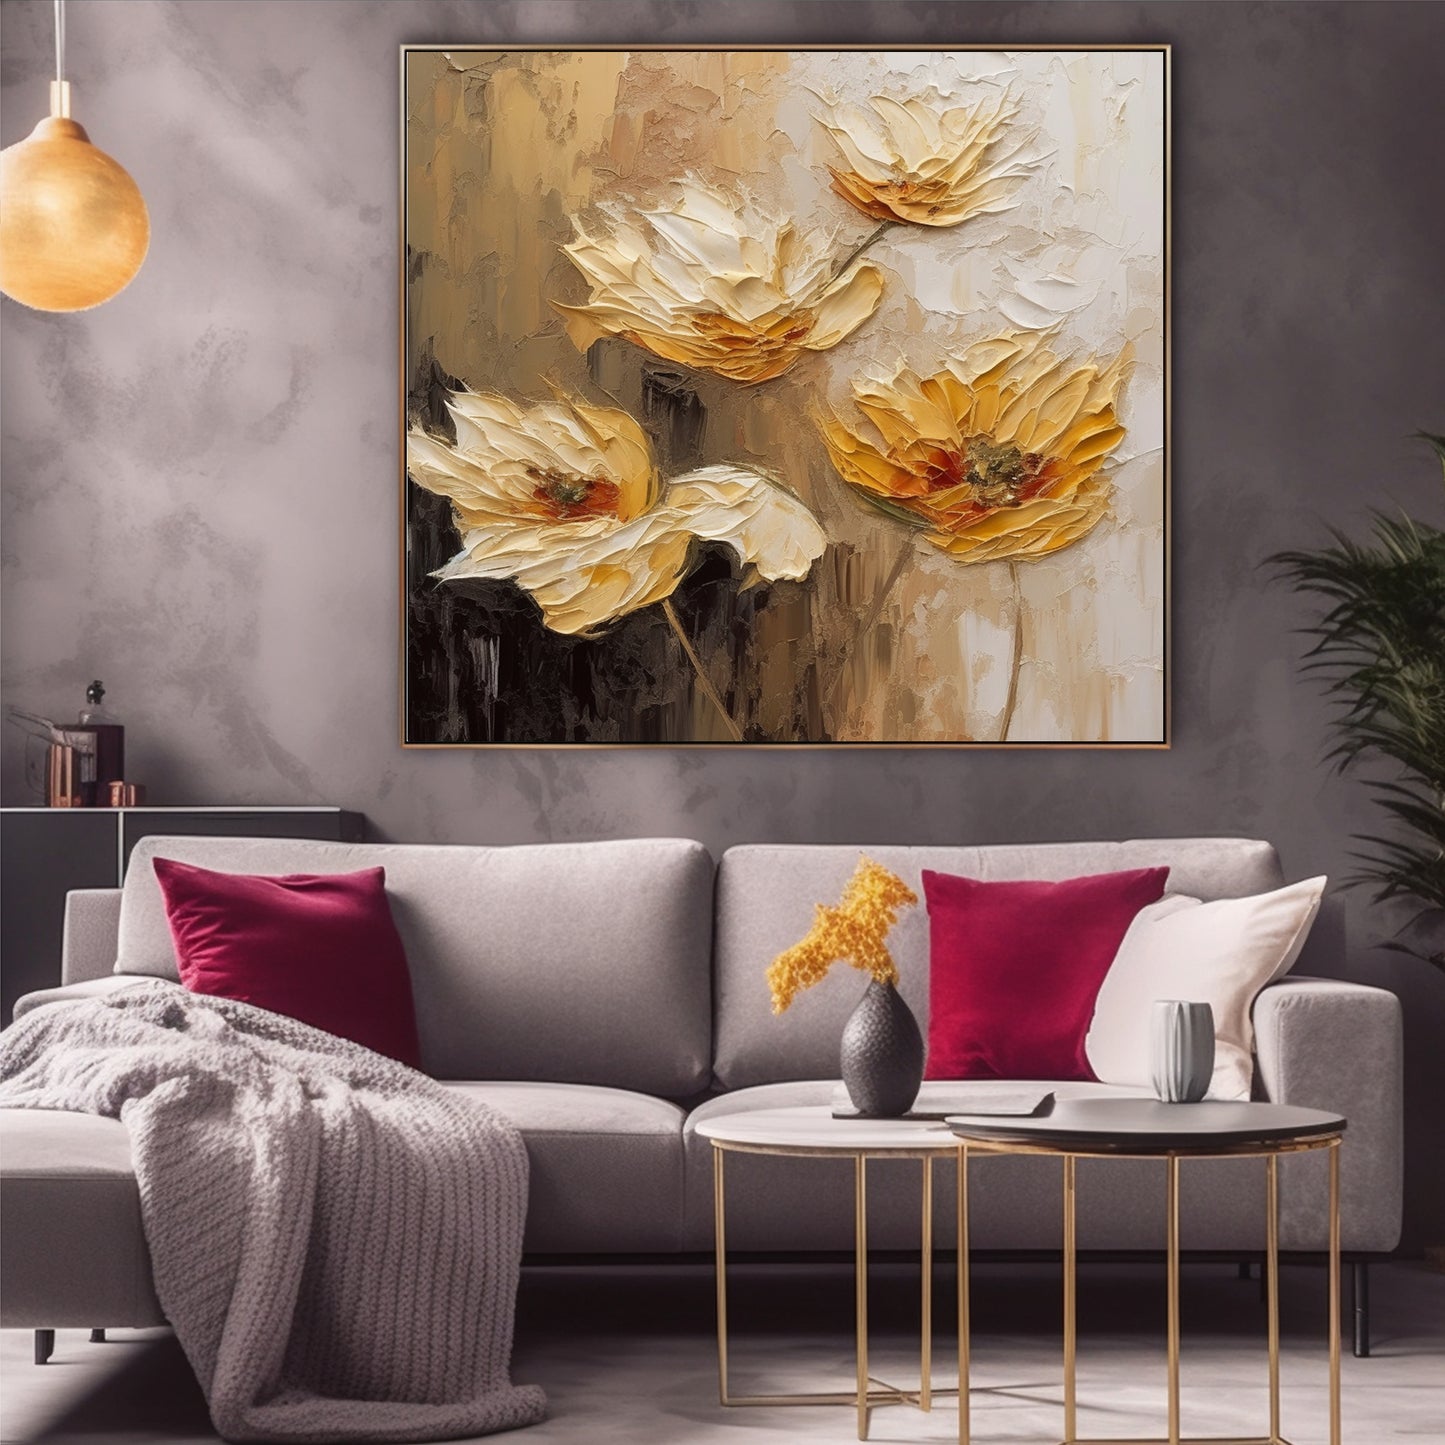 Texture Wall Decor Home Decor Gift Abstract Floral Painting F#BRT2345